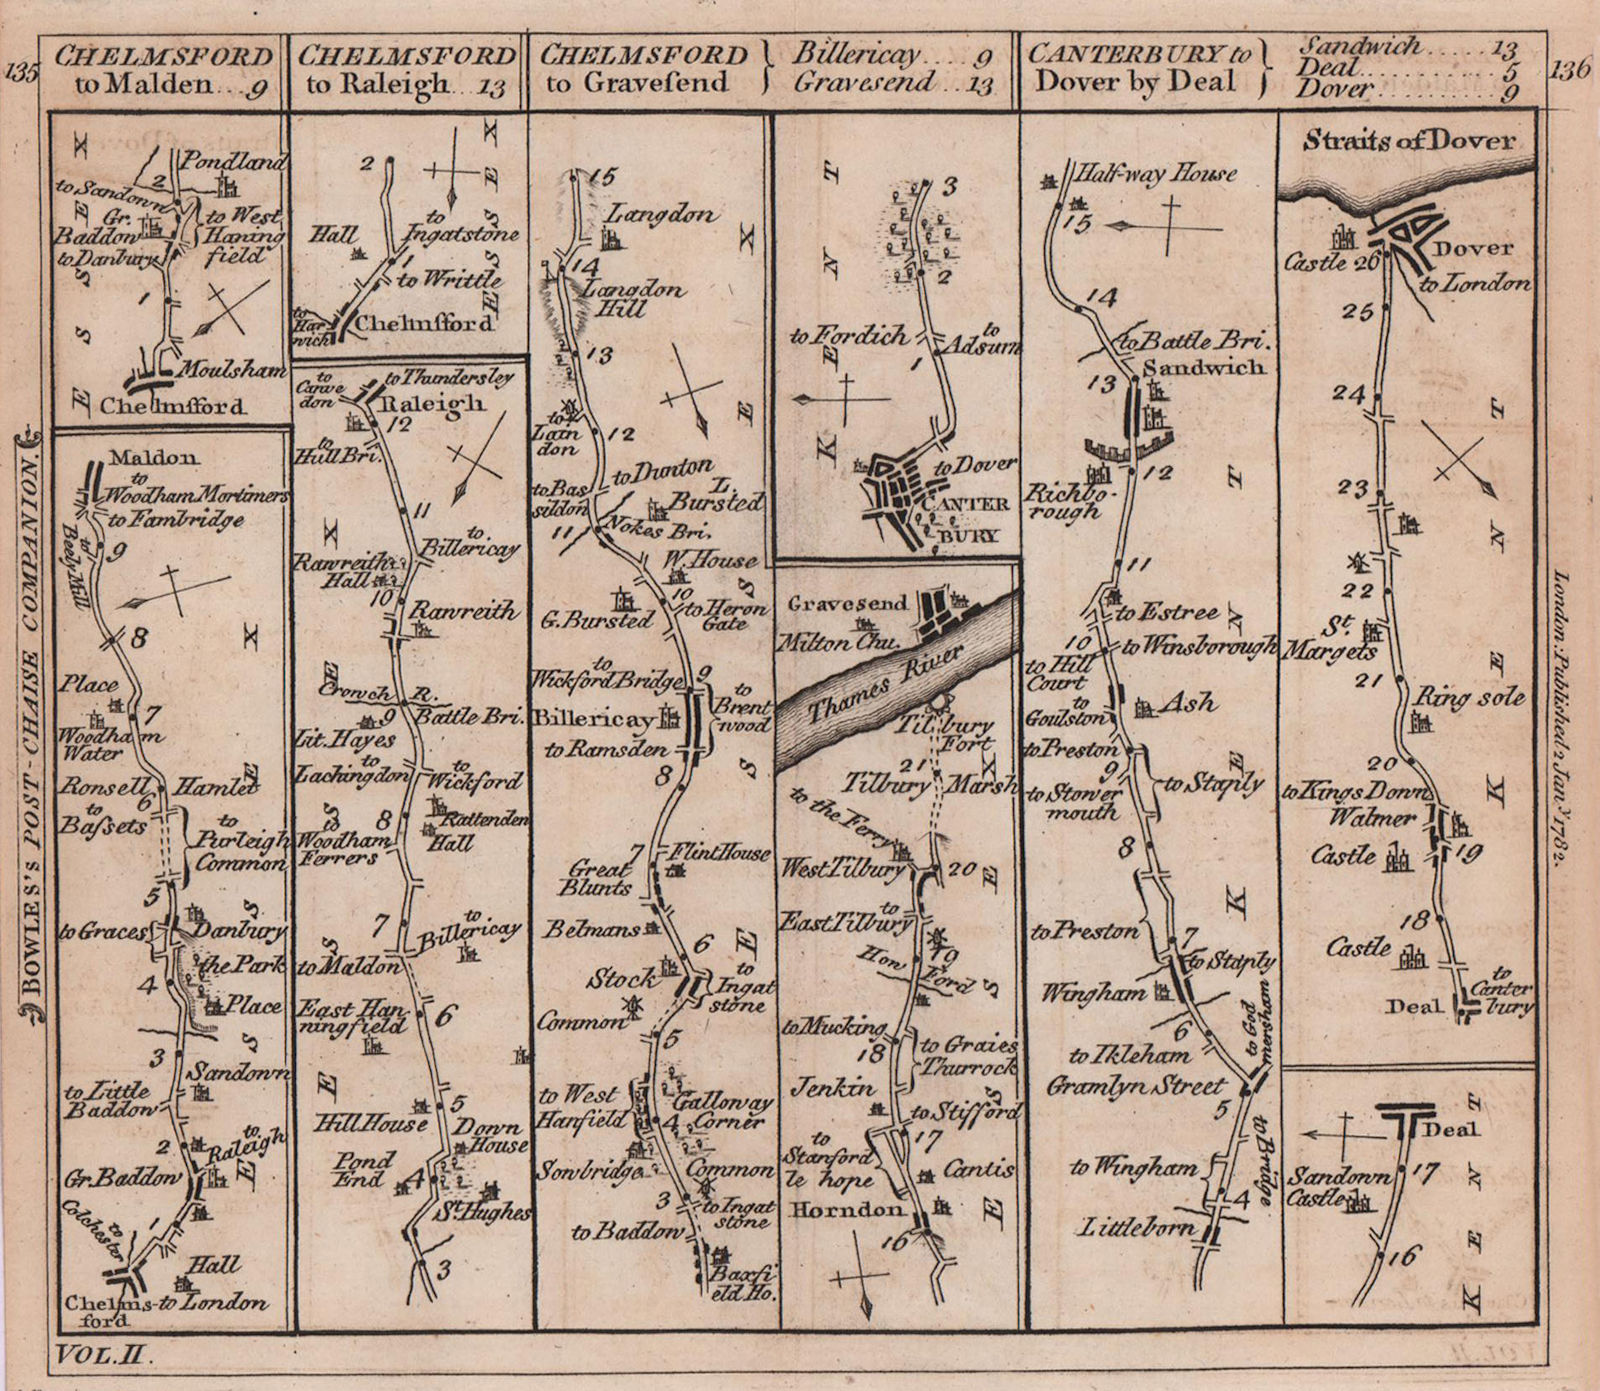 Associate Product Chelmsford-Billericay-Gravesend. Canterbury-Dover road strip map BOWLES 1782